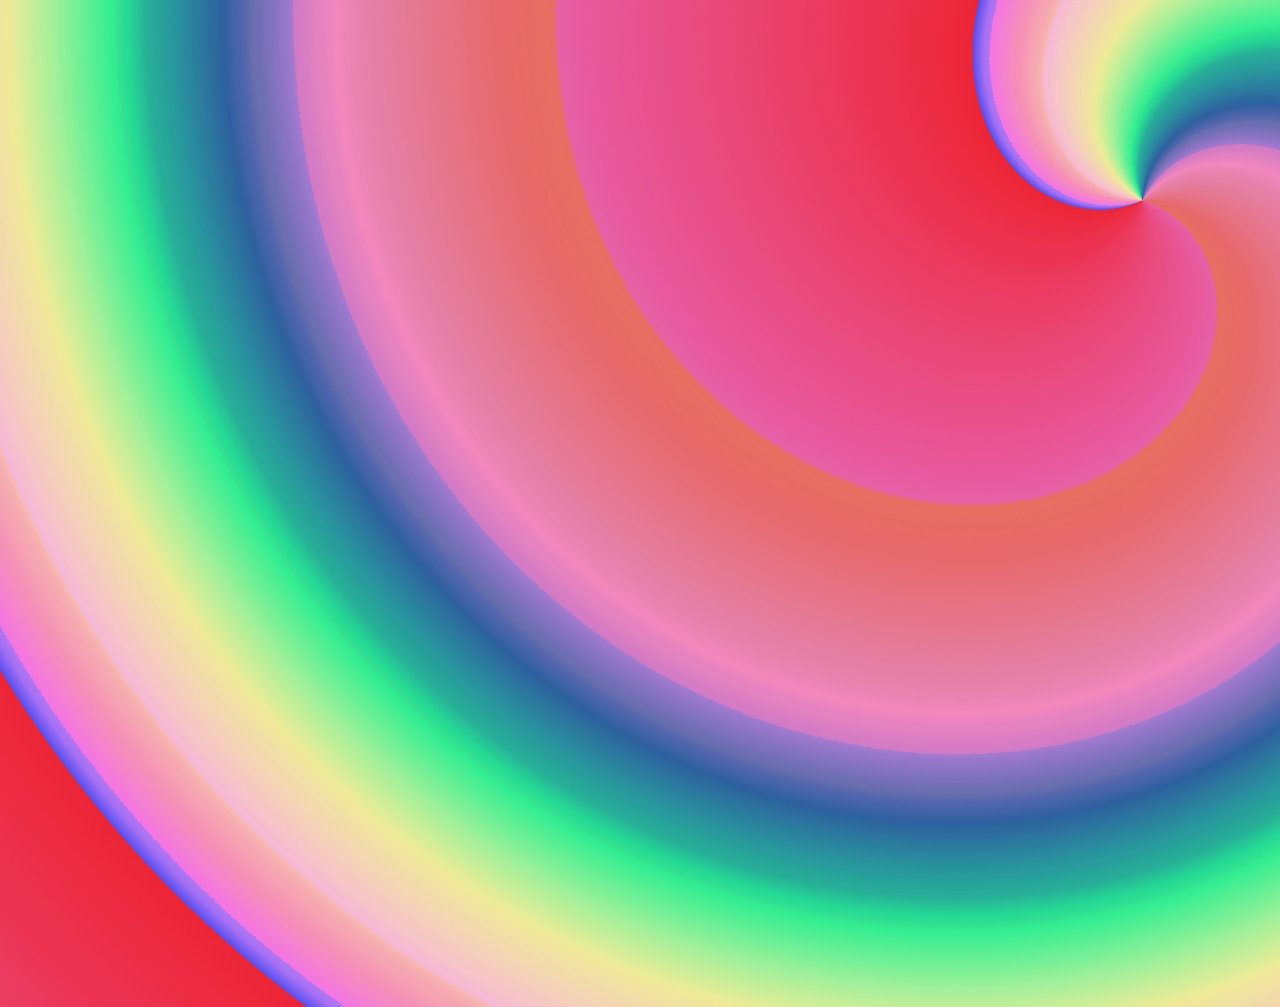 Curvy Rainbow Backgrounds powerpoint backgrounds